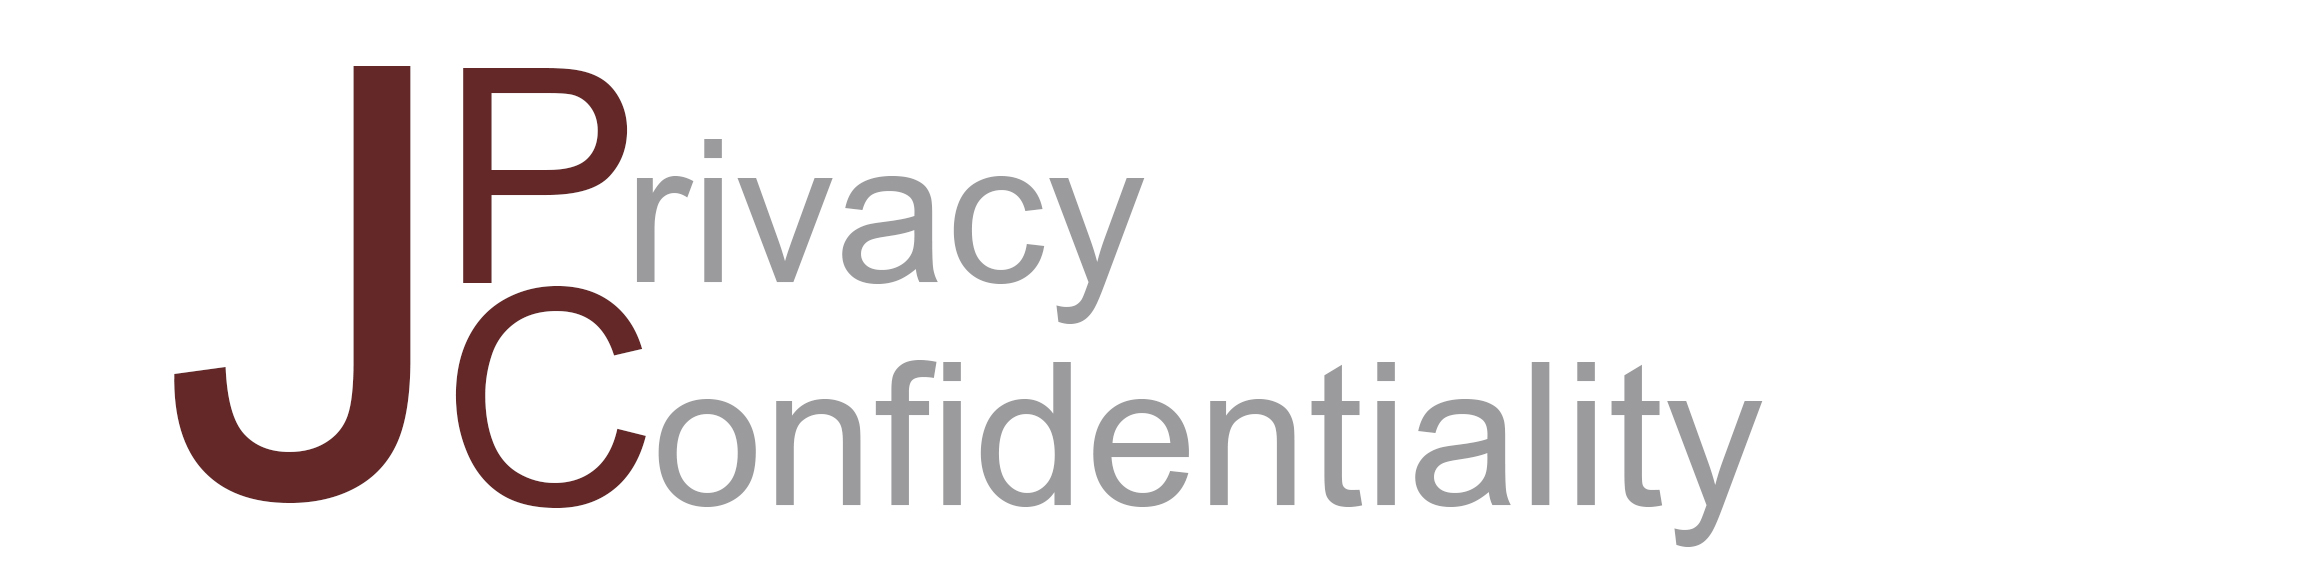 Journal of Privacy and Confidentiality